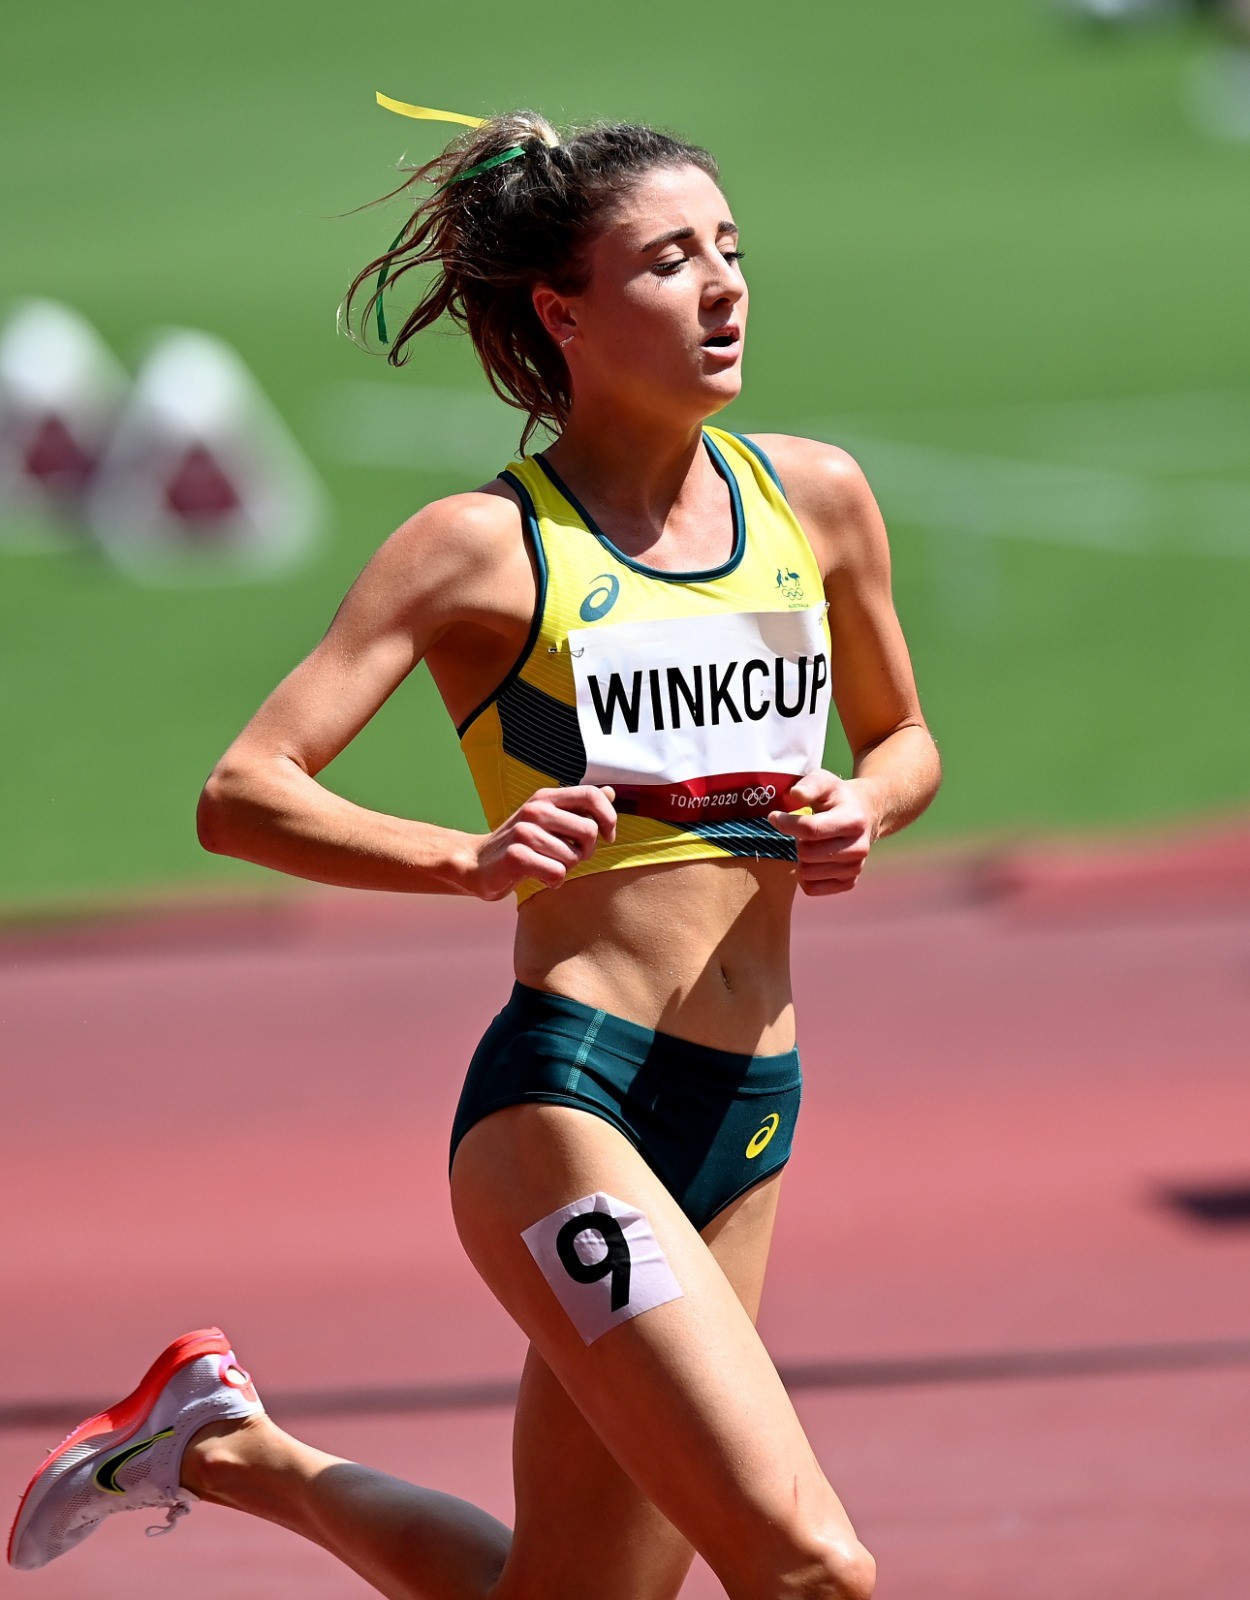 Young woman running on a track in the Australian Olympic Athletics uniform